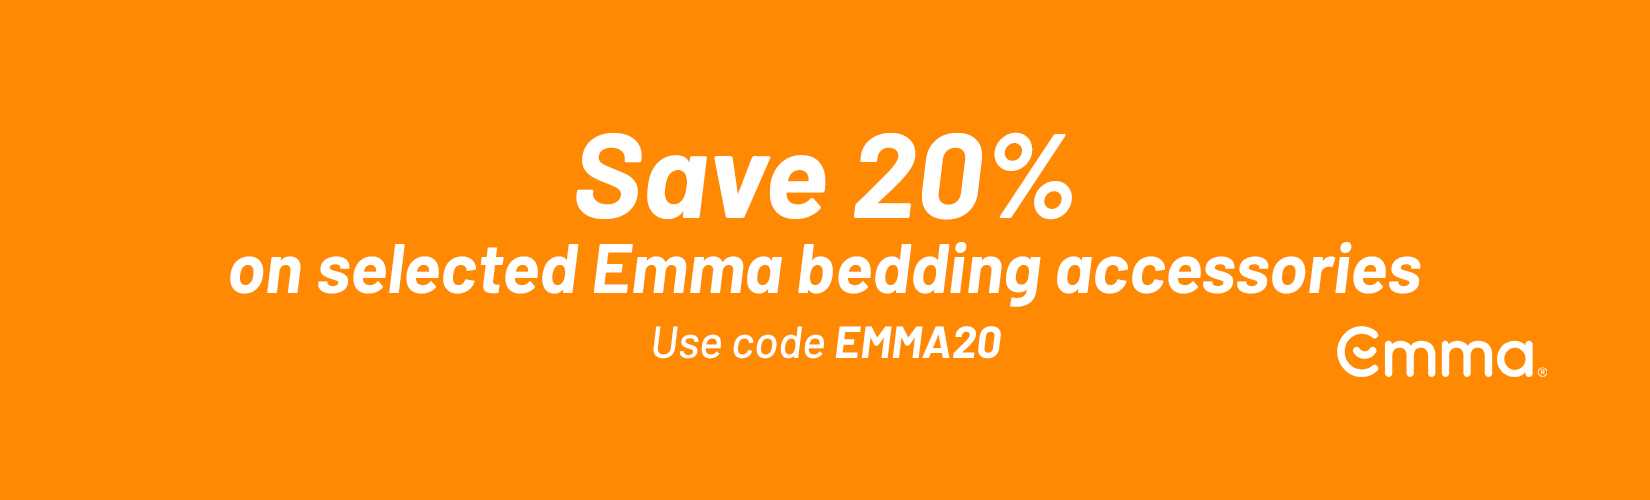 Save 20% on selected Emma bedding accessories. Use code EMMA20.